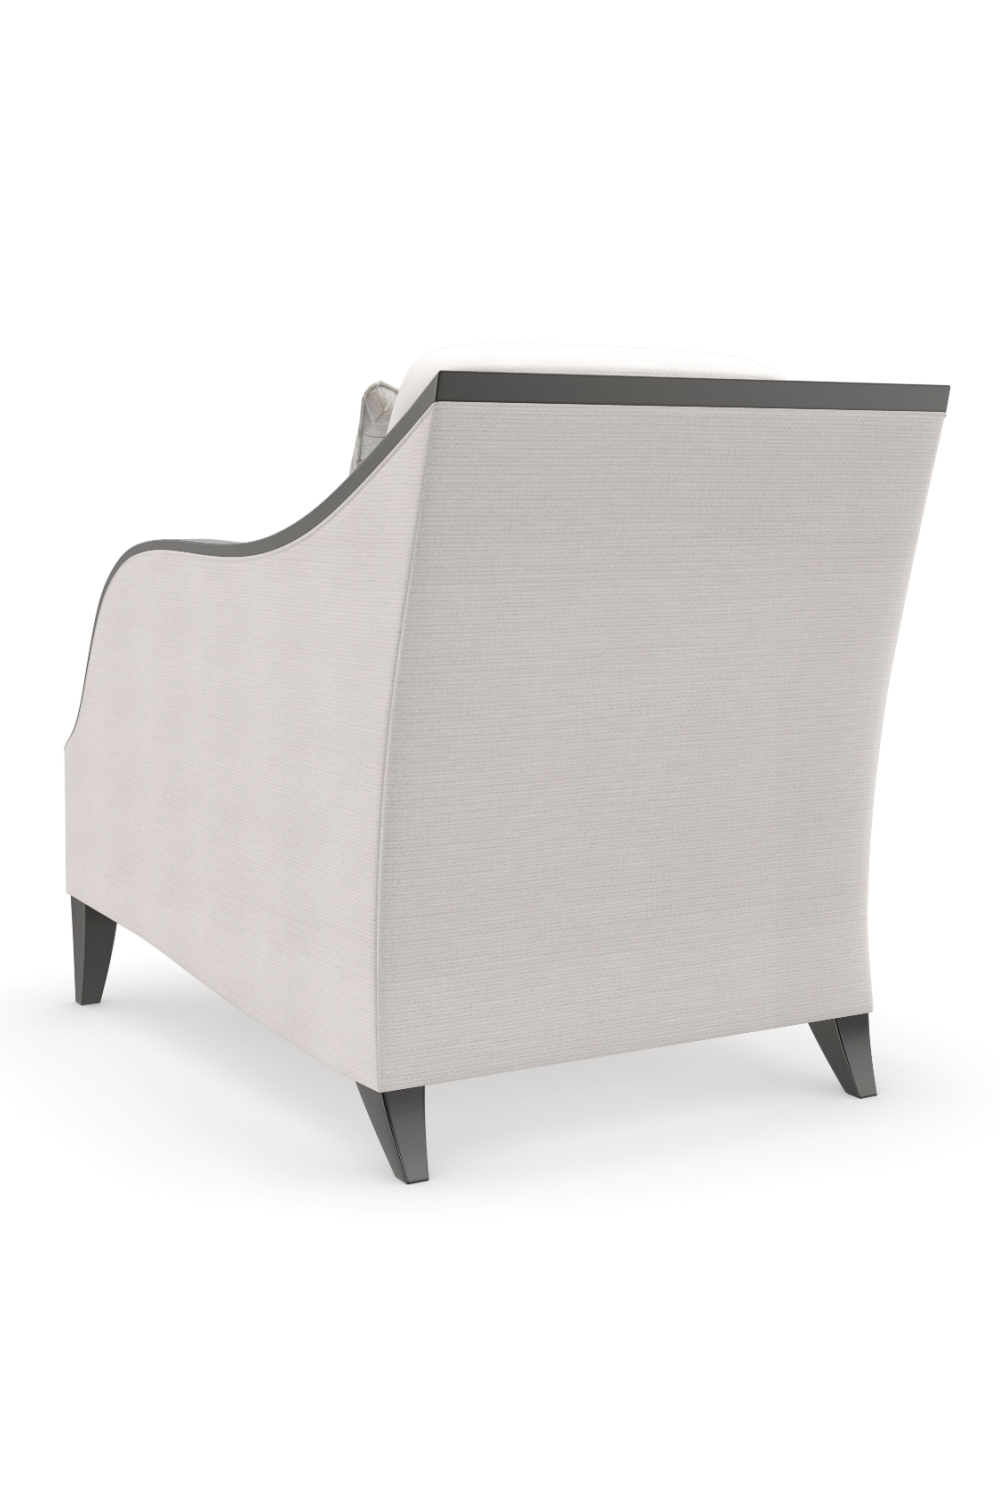 Track Arm Lounge Chair | Caracole Pitch Perfect | Oroa.com